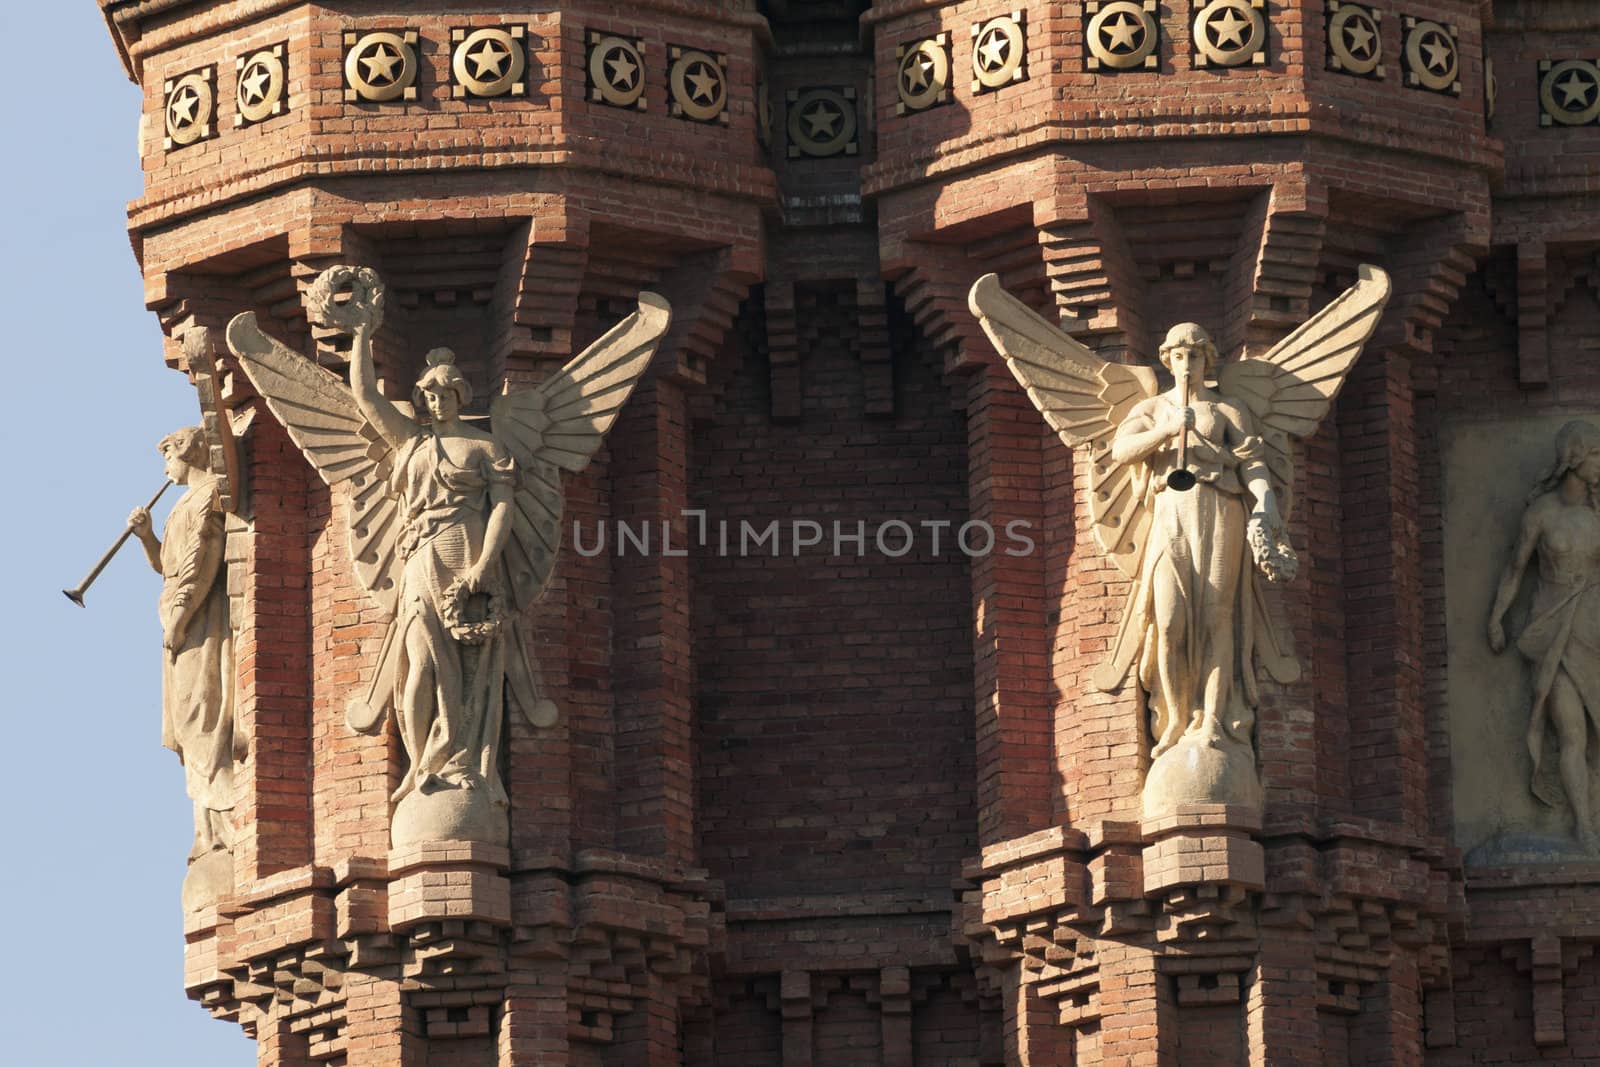 top fragment of famous Arc de Triomf built for the 1888 Universal exhibition in Barcelona, Spain; Figures of angels blowing a horn